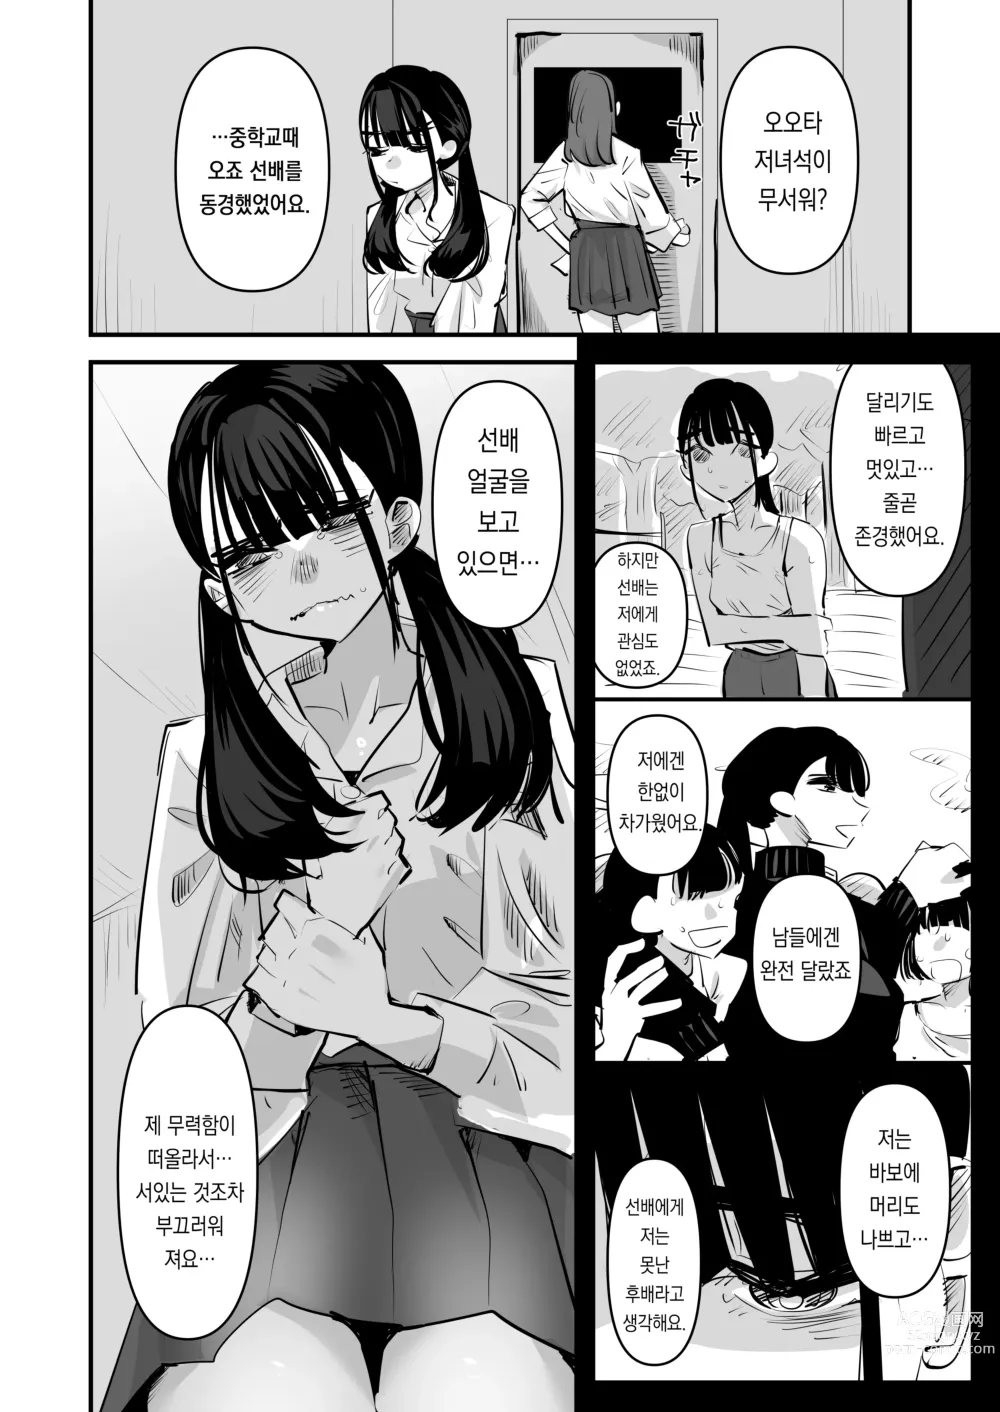 Page 26 of doujinshi 육상부VS백합섹스부